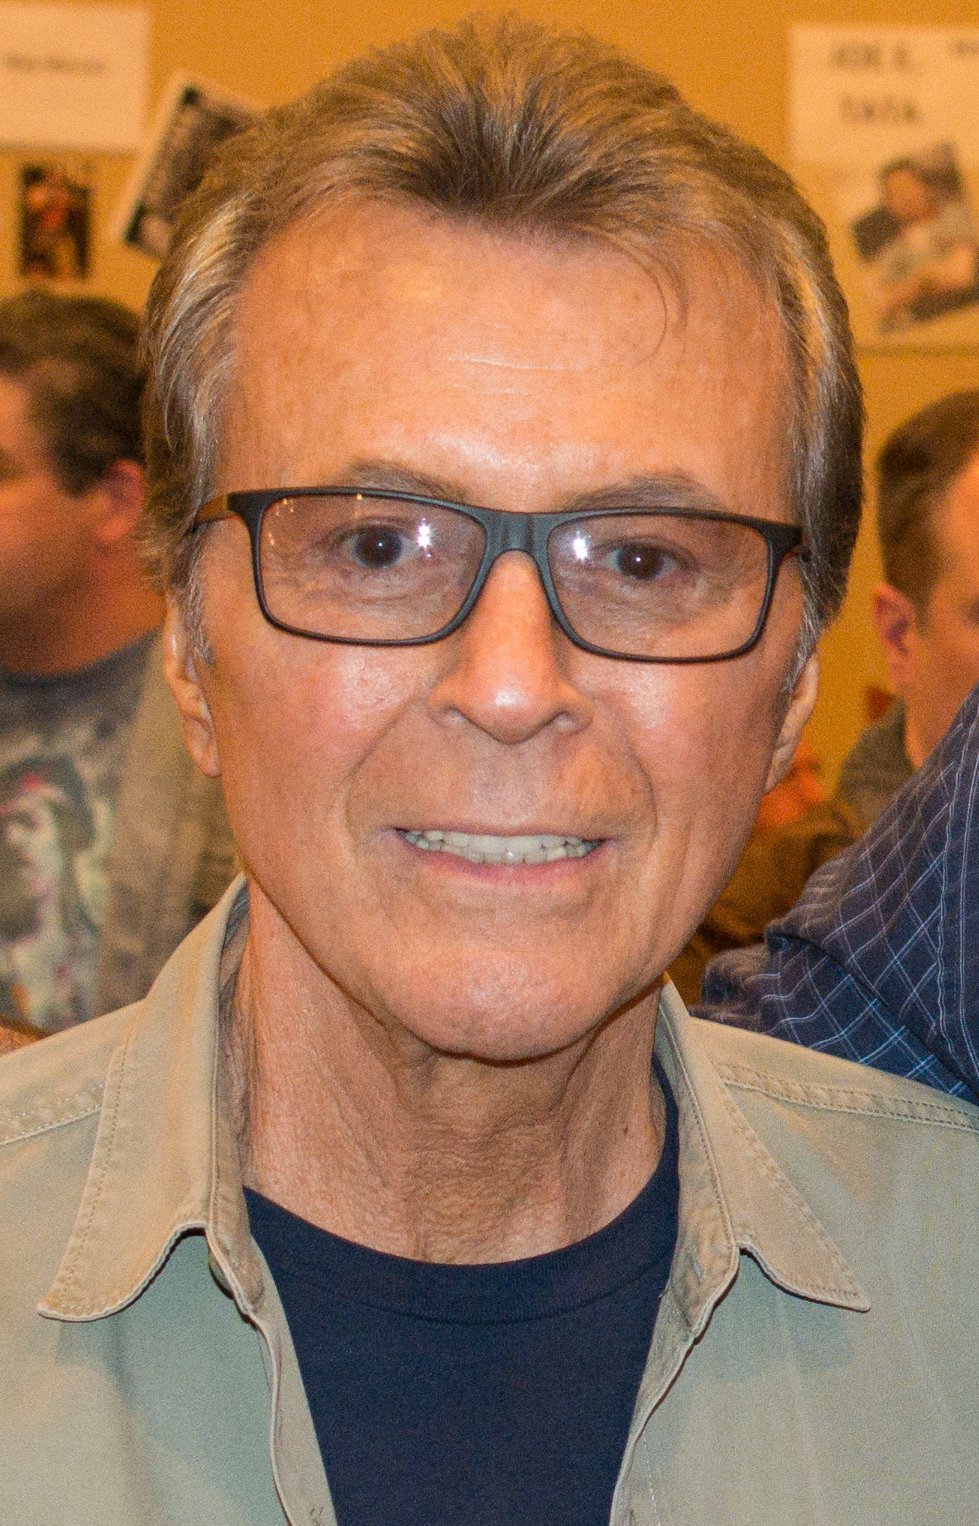 James Darren in Parsippany, New Jersey on April 24, 2015 | Source: Wikimedia Commons